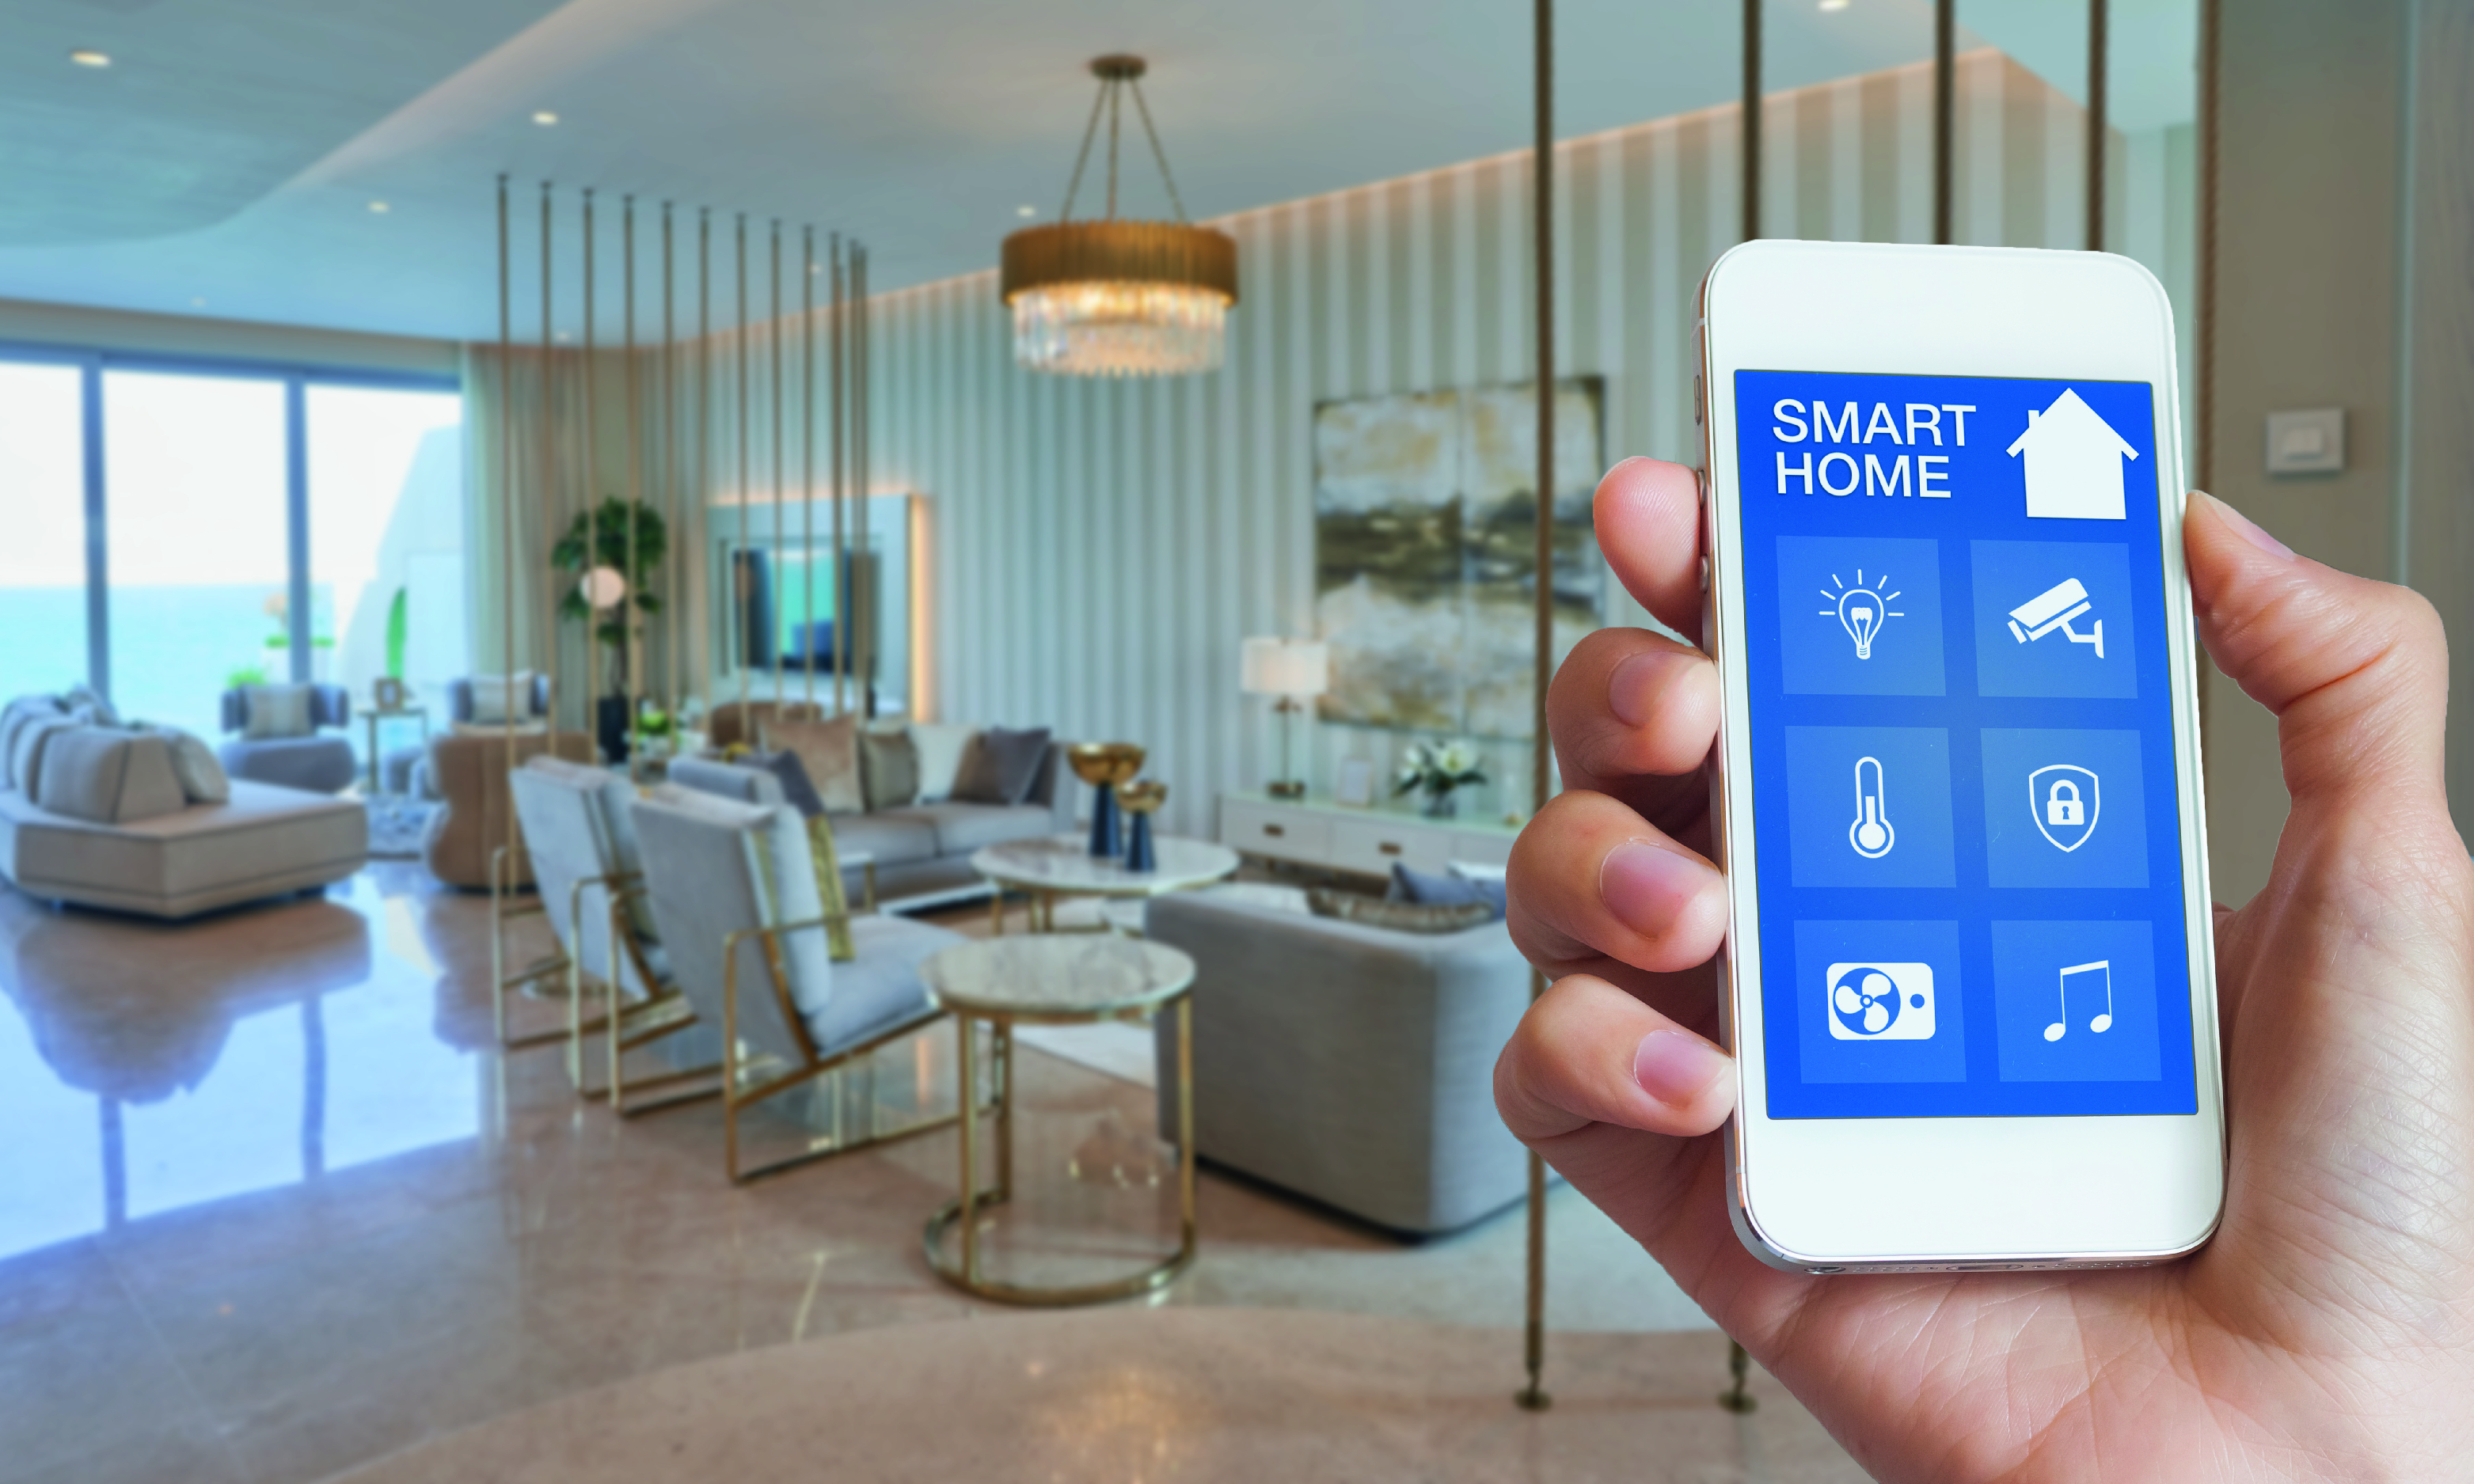 Technology at Home: The Smart Home Trend